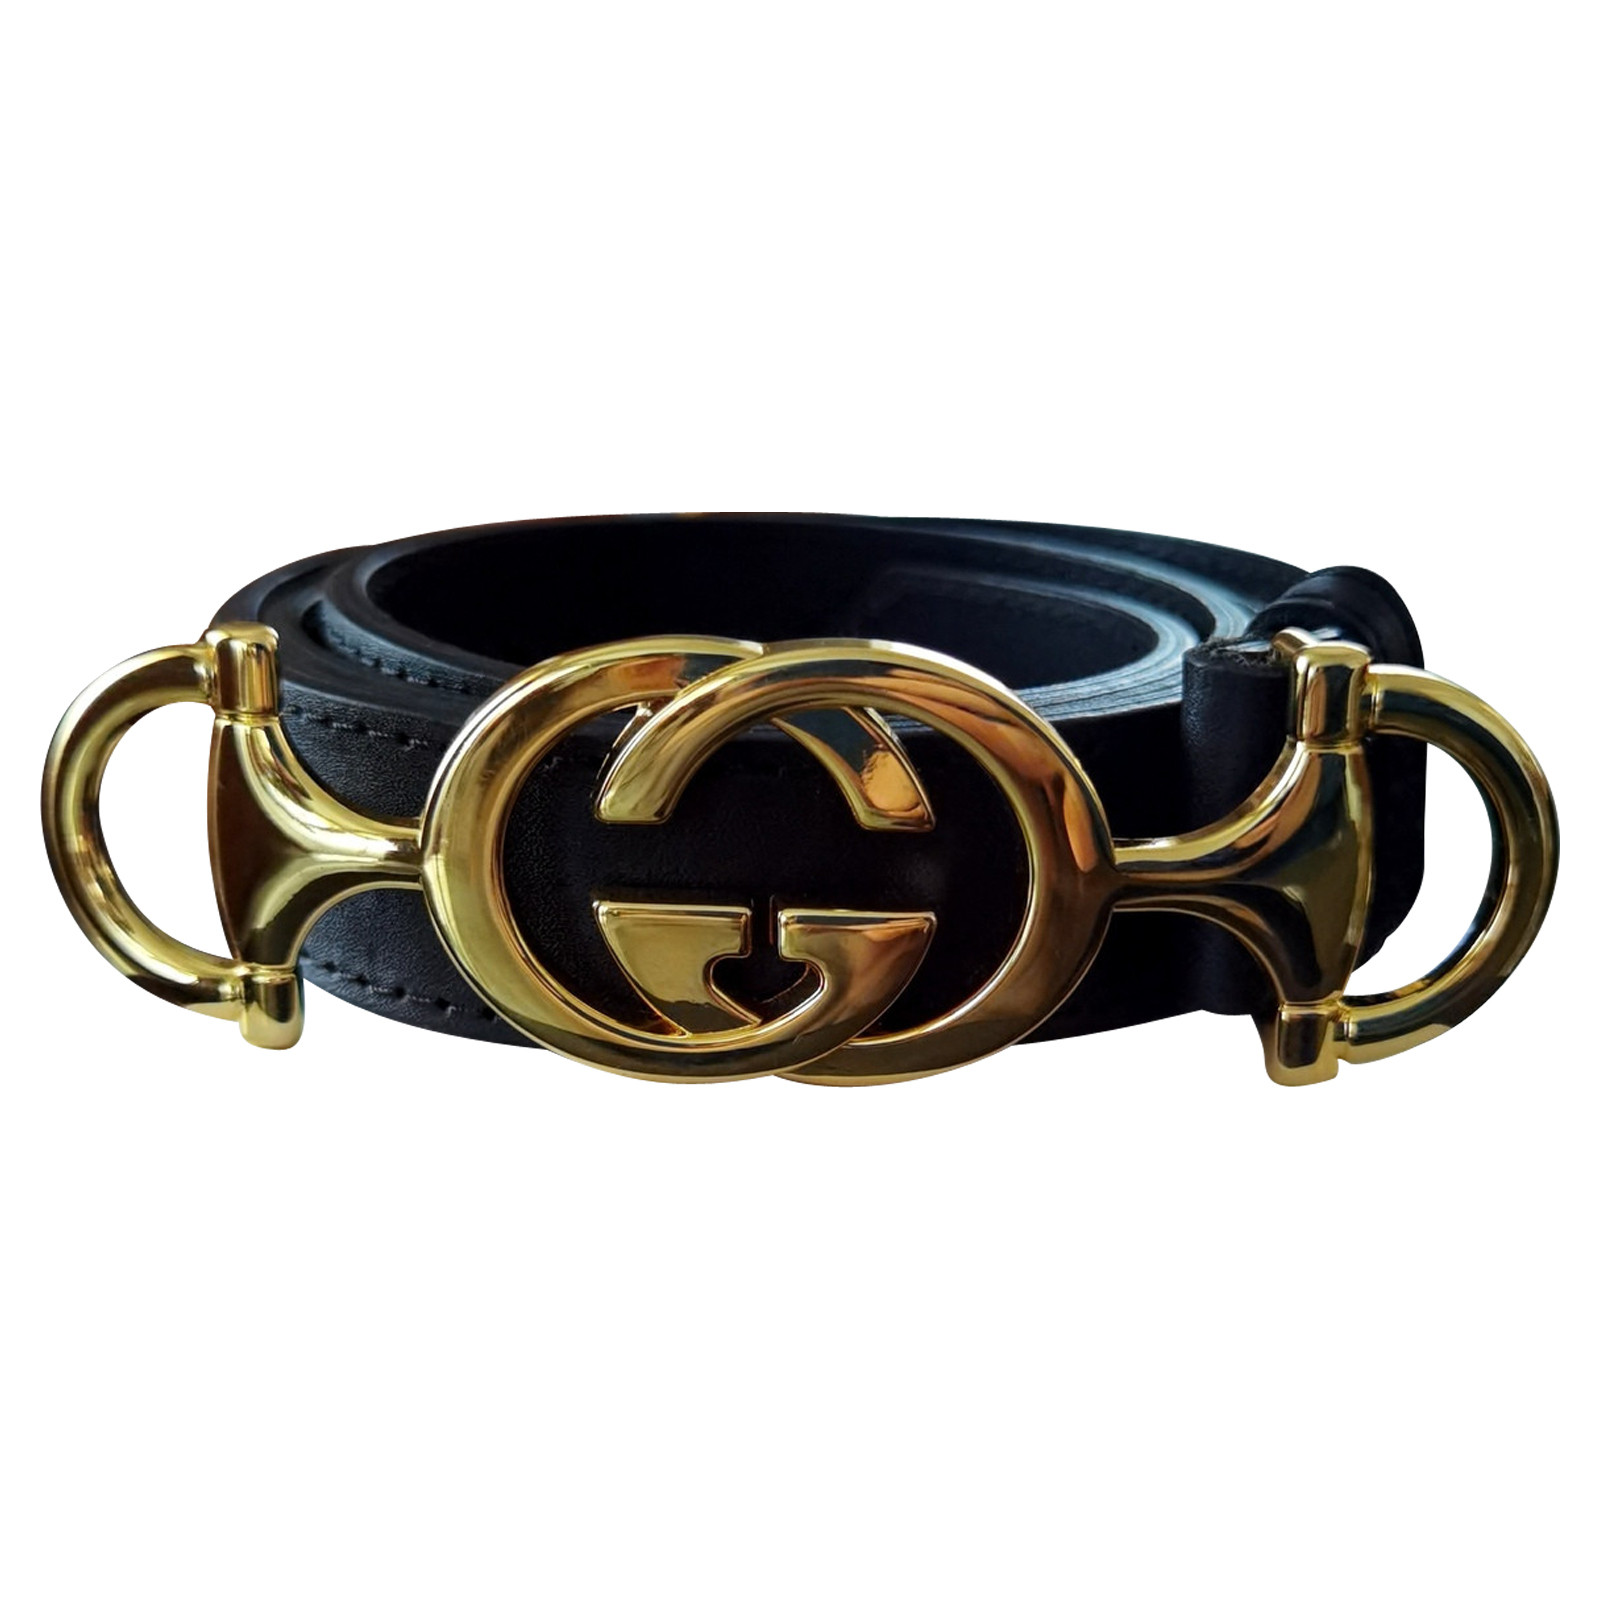 Gucci Belt in Black - Second Hand Gucci Belt in Black buy used for 340€  (7821916)